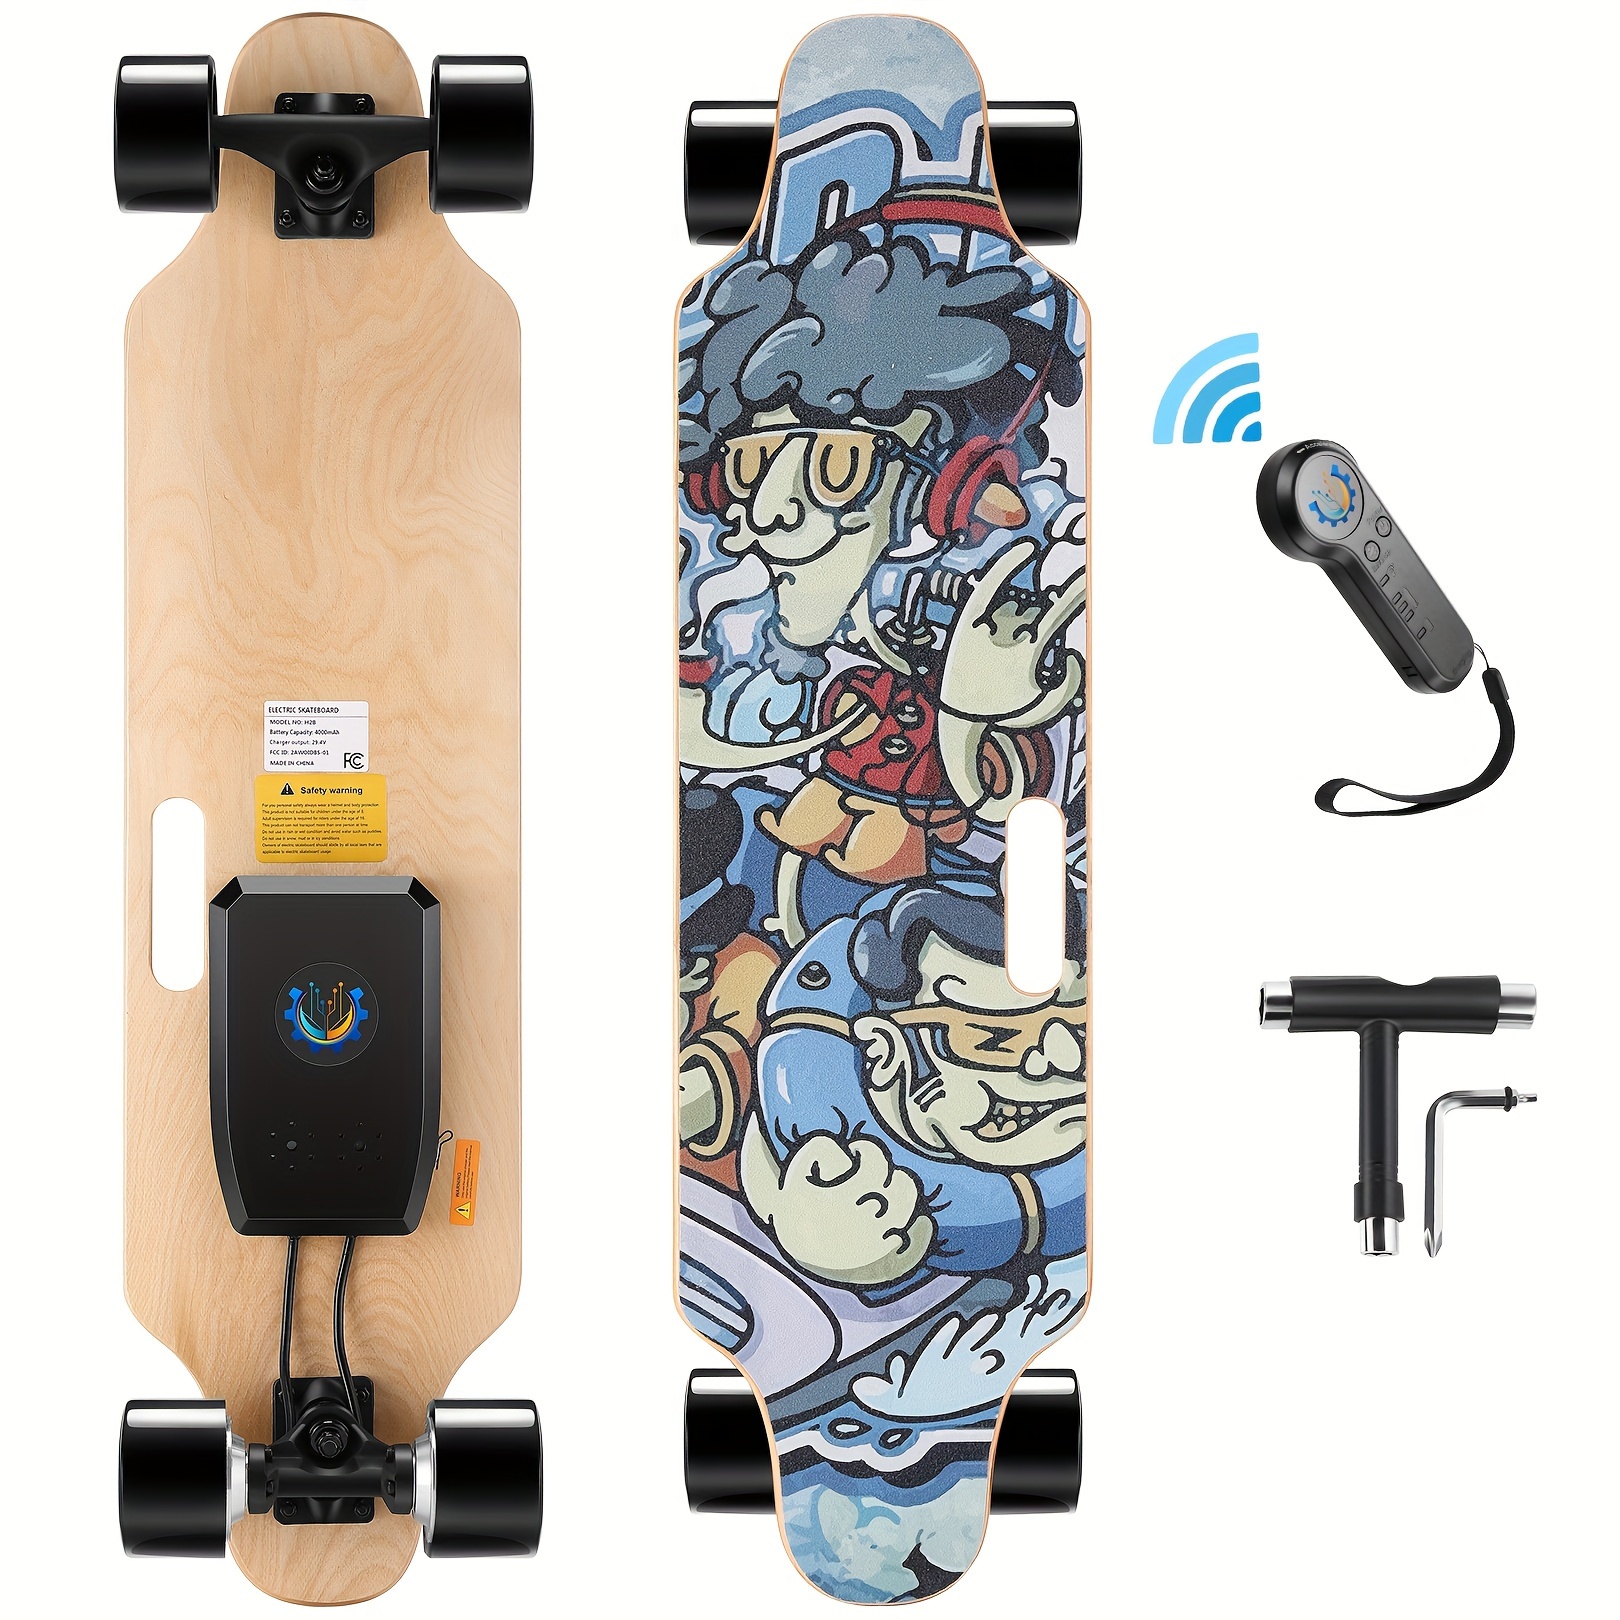 

Electric Skateboard With Remote, Electric Longboard With 700w Brushless Motor For Adults & Teens Beginners, 18.6 Mph Top Speed & 12 Miles Range